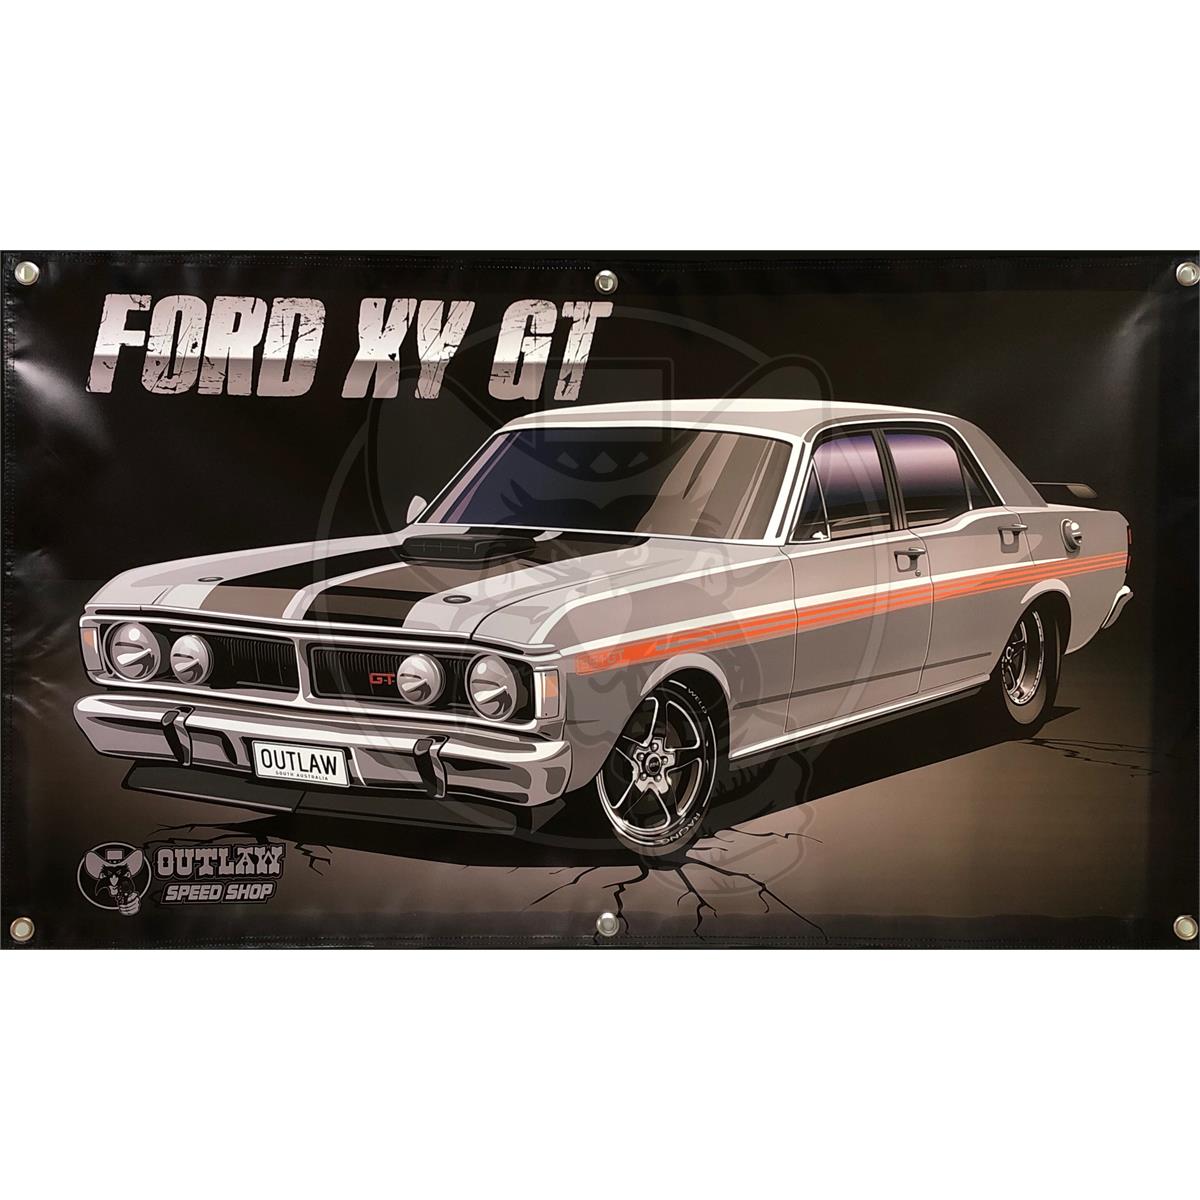 OUTLAW BANNER 1200MM X 700MM FITS FORD XY GT FALCON SILVER